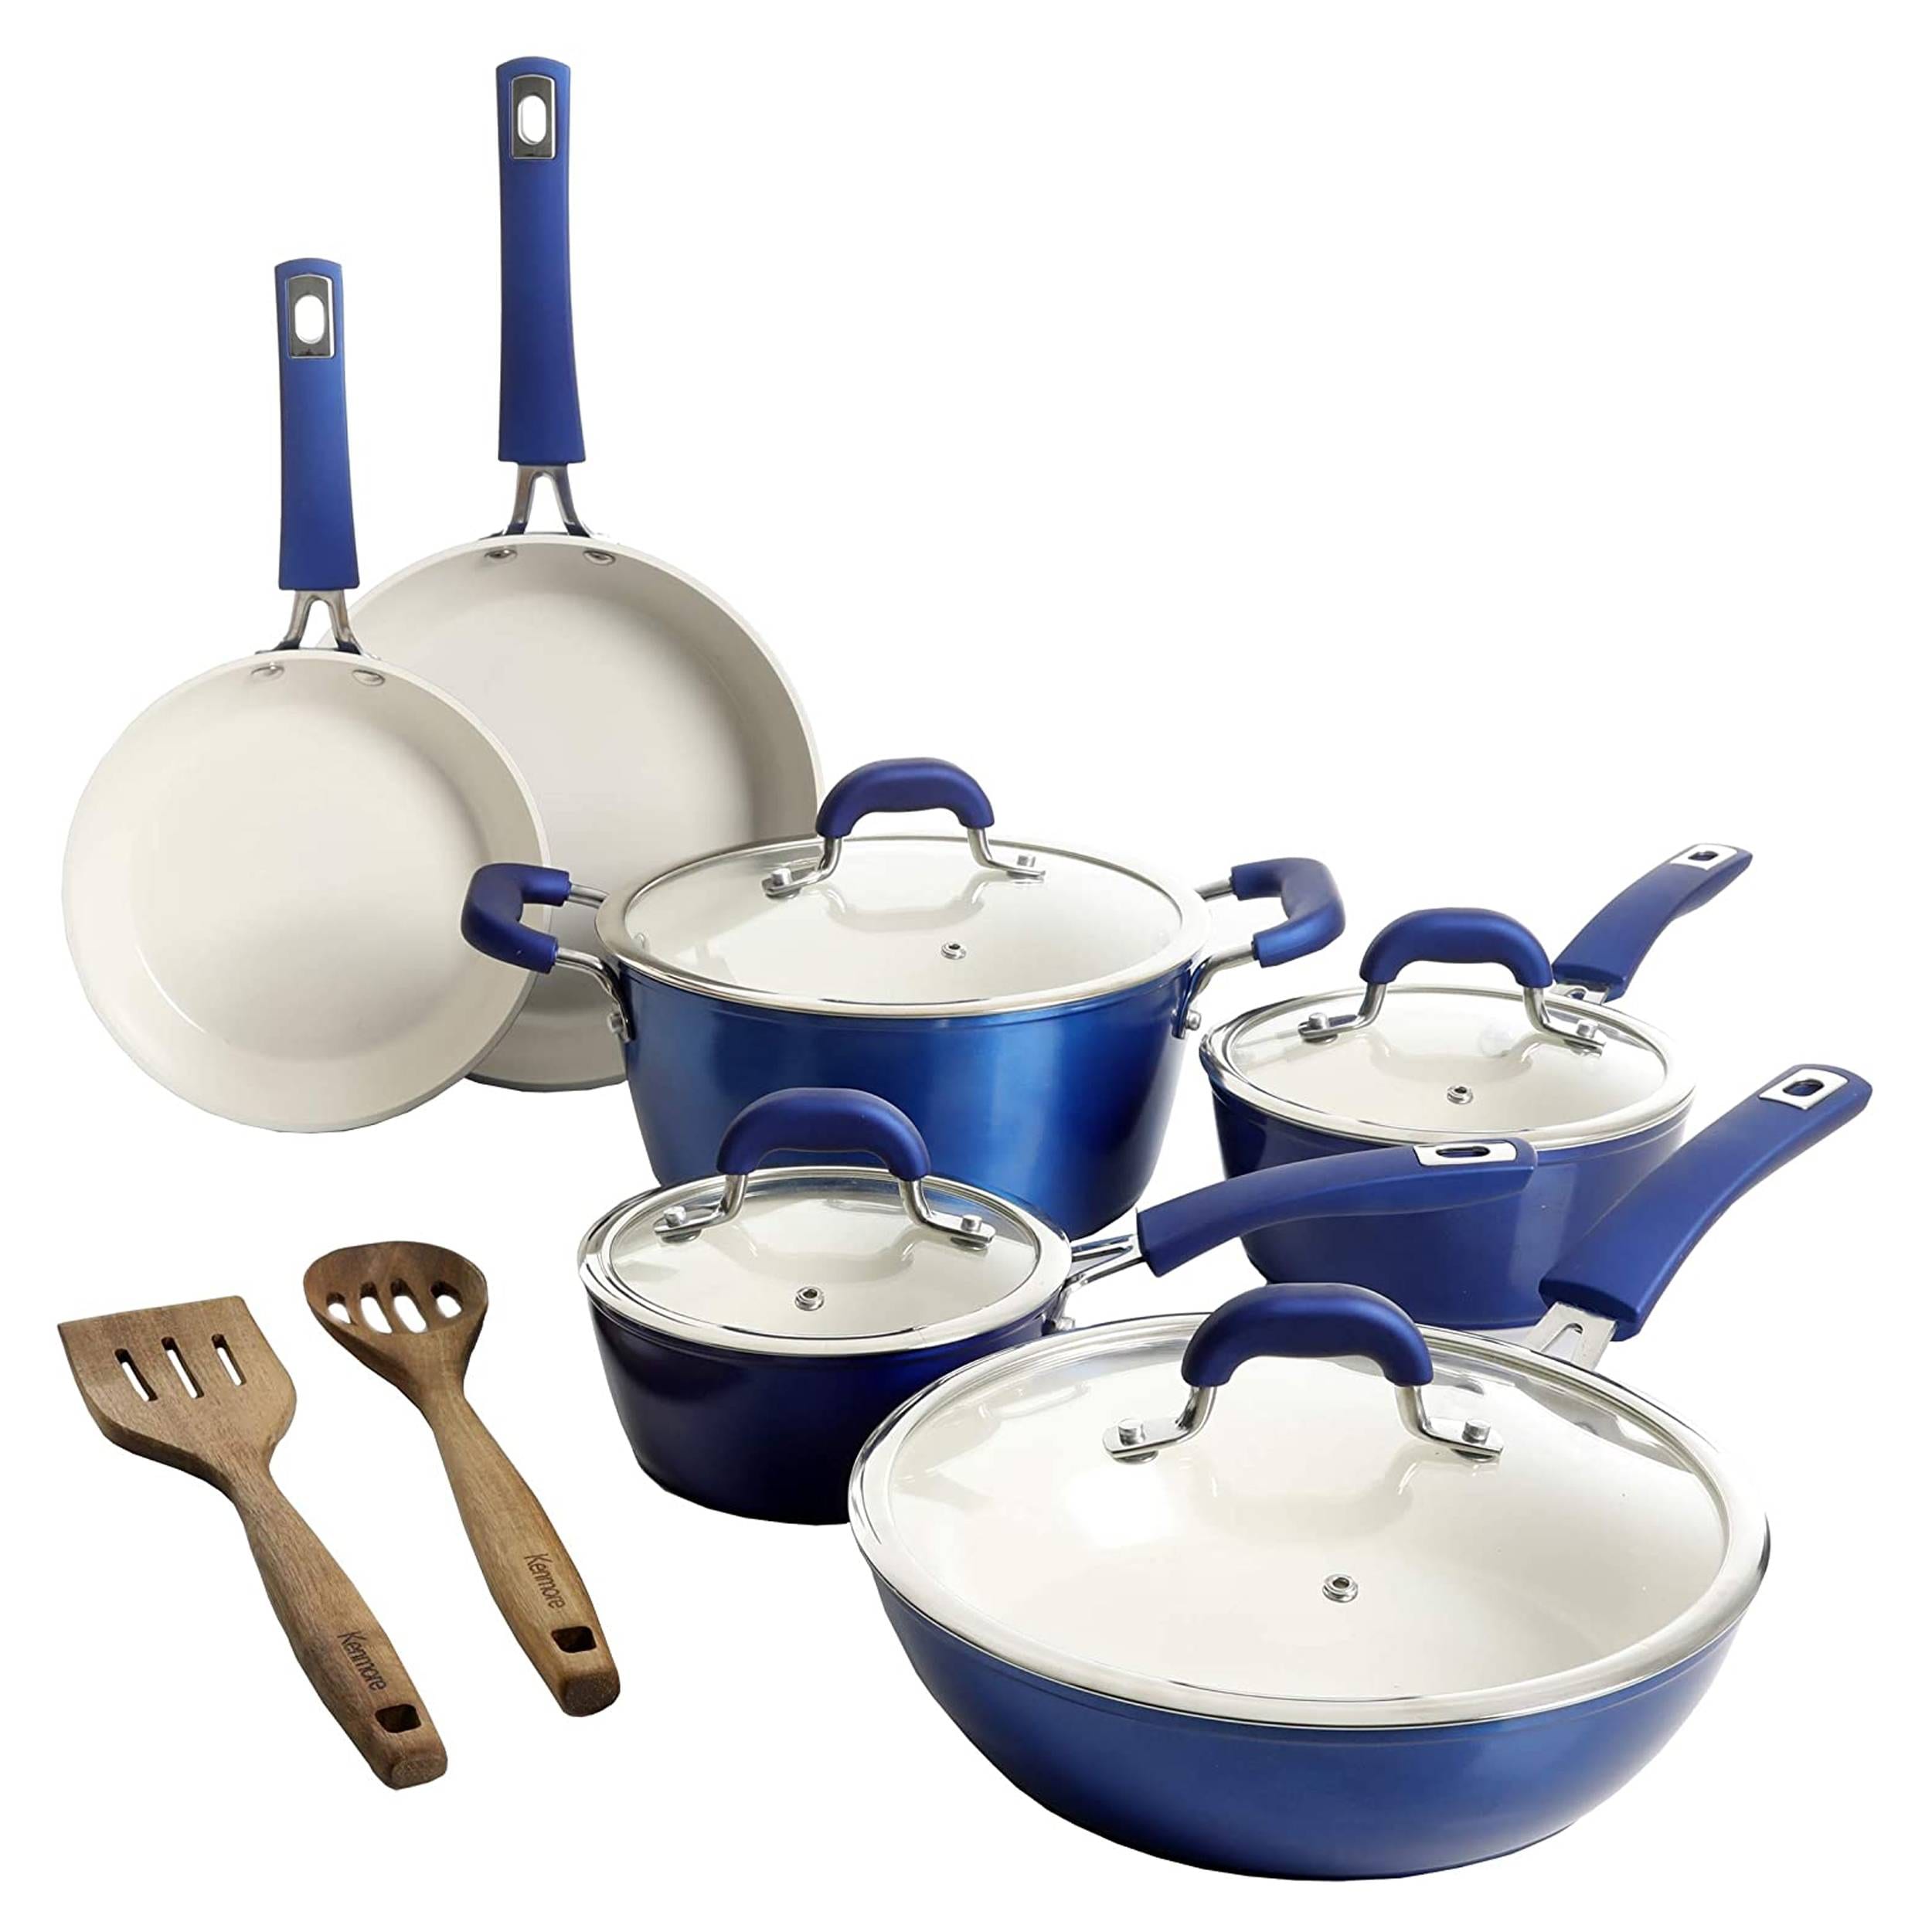 Kenmore Cookware at Lowes.com